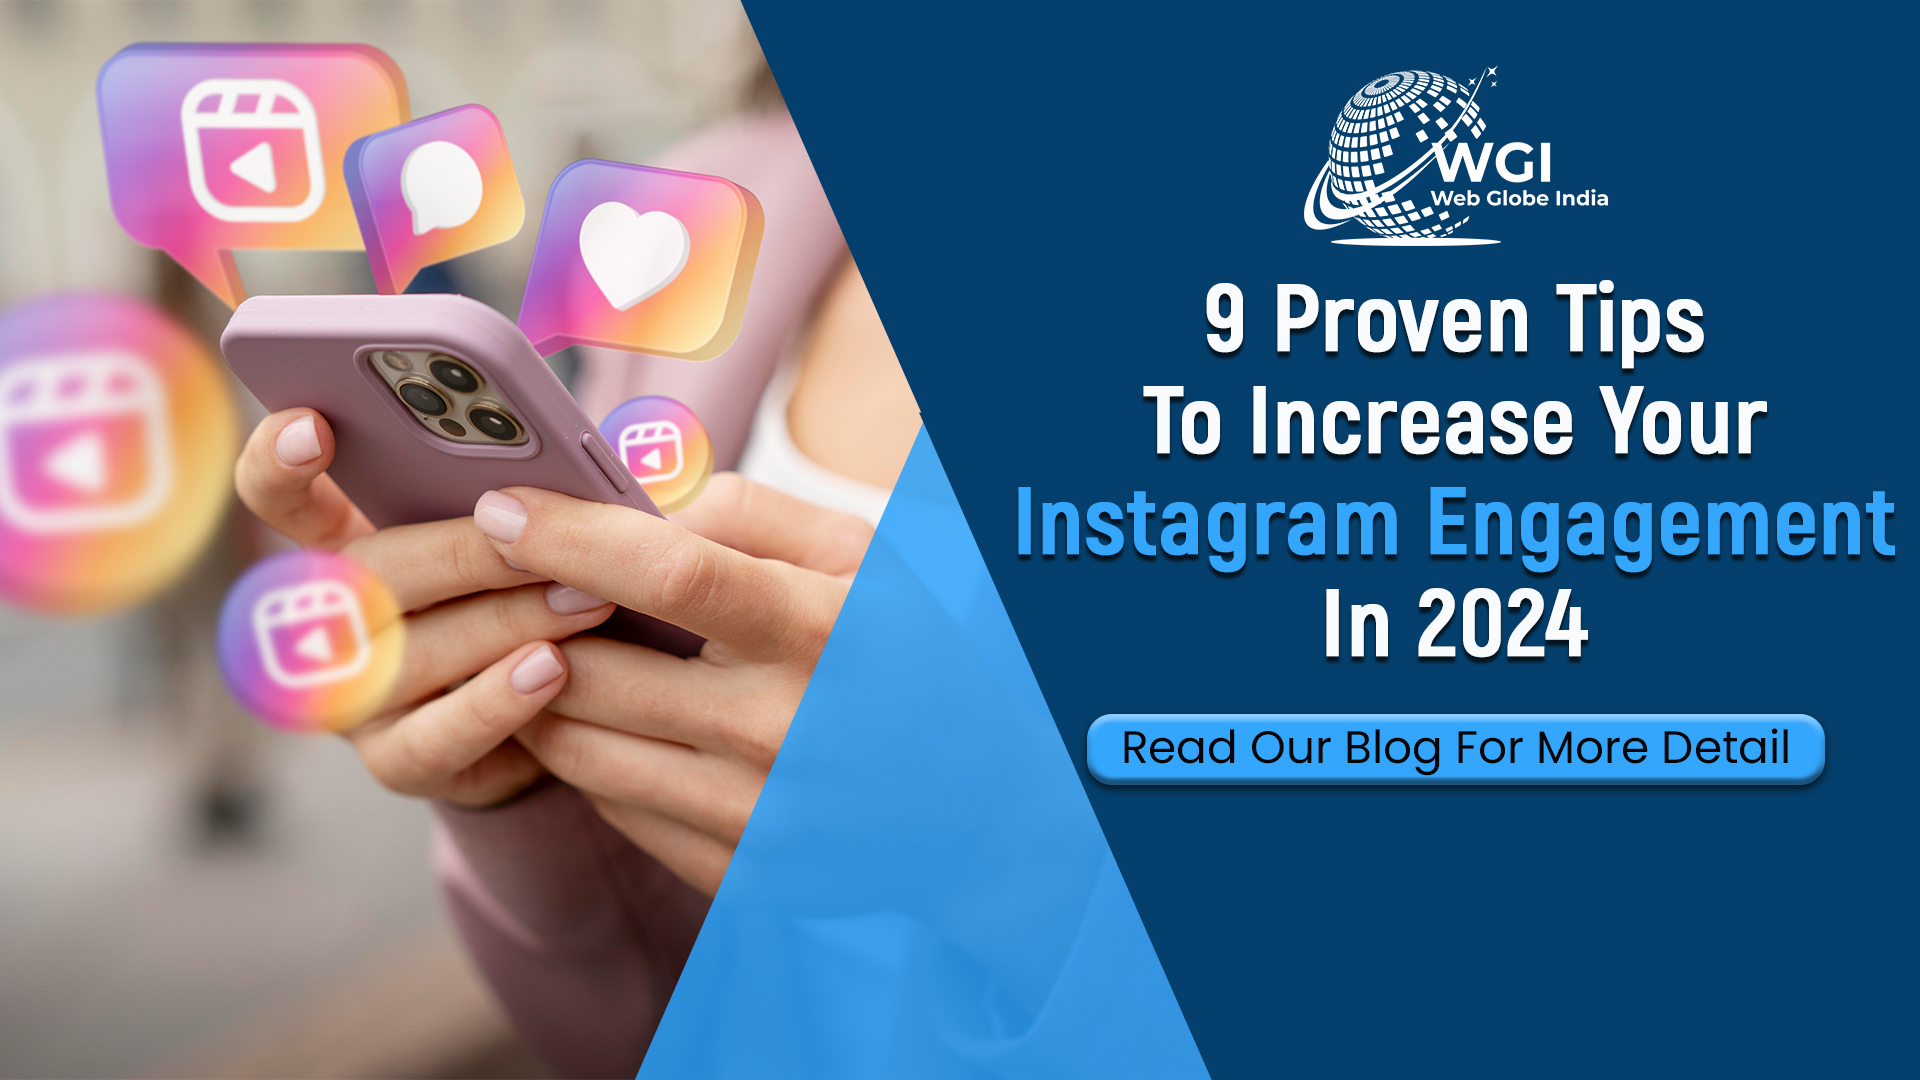 9 Proven Tips to Increase Your Instagram Engagement in 2024